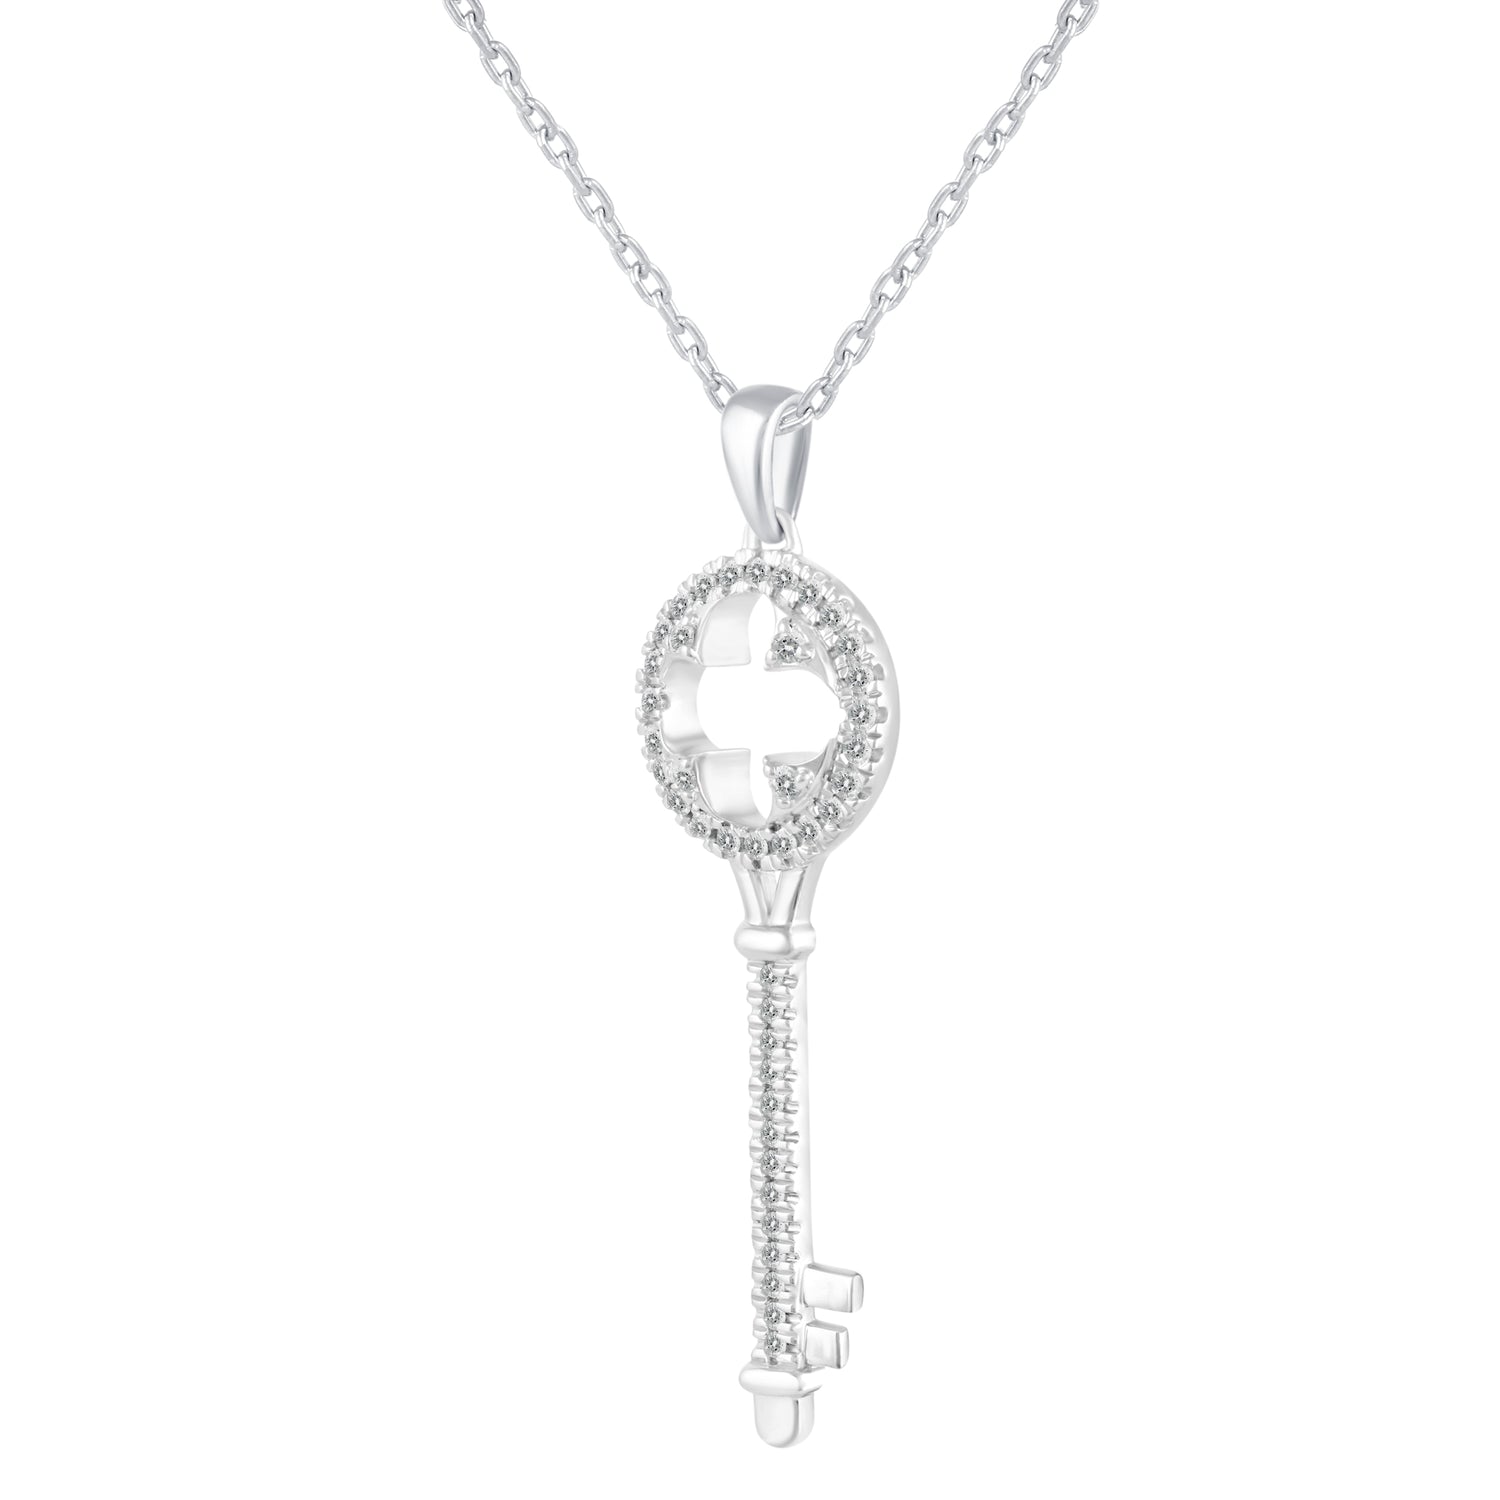 1/5 Cttw Diamond Clover Key Pendant Necklace set in 925 Sterling Silver